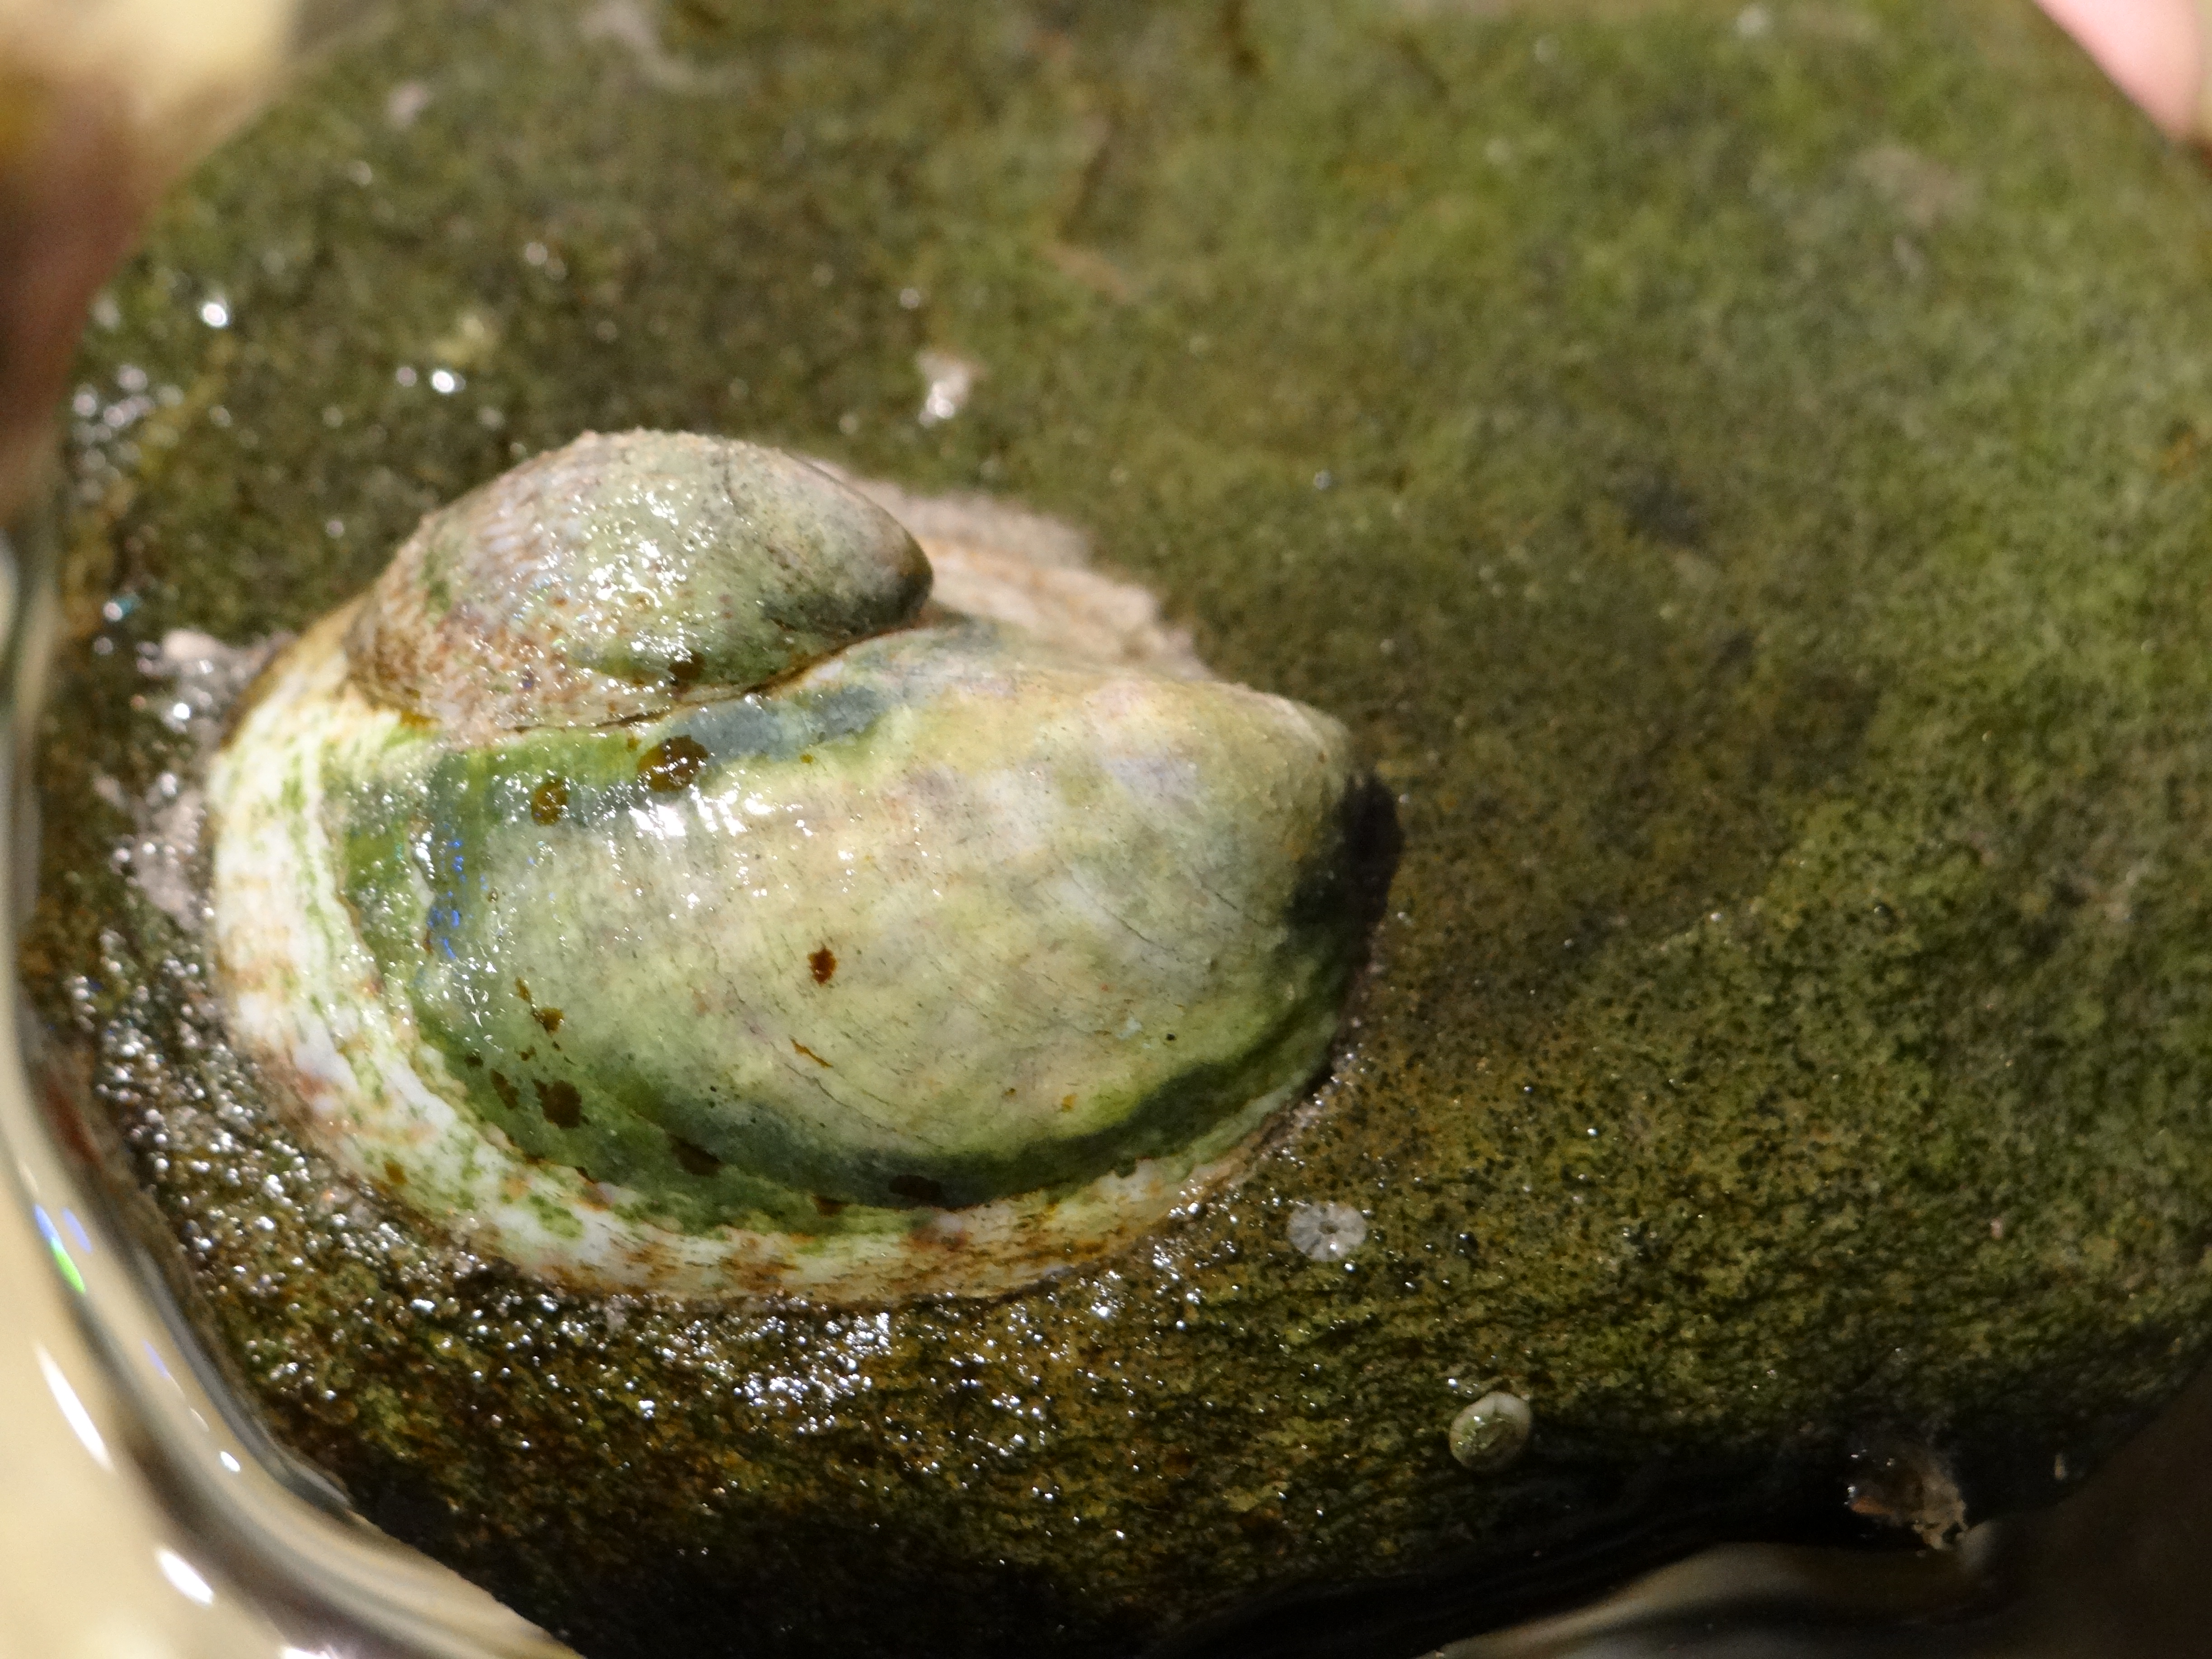 Atlantic slipper limpets (two)